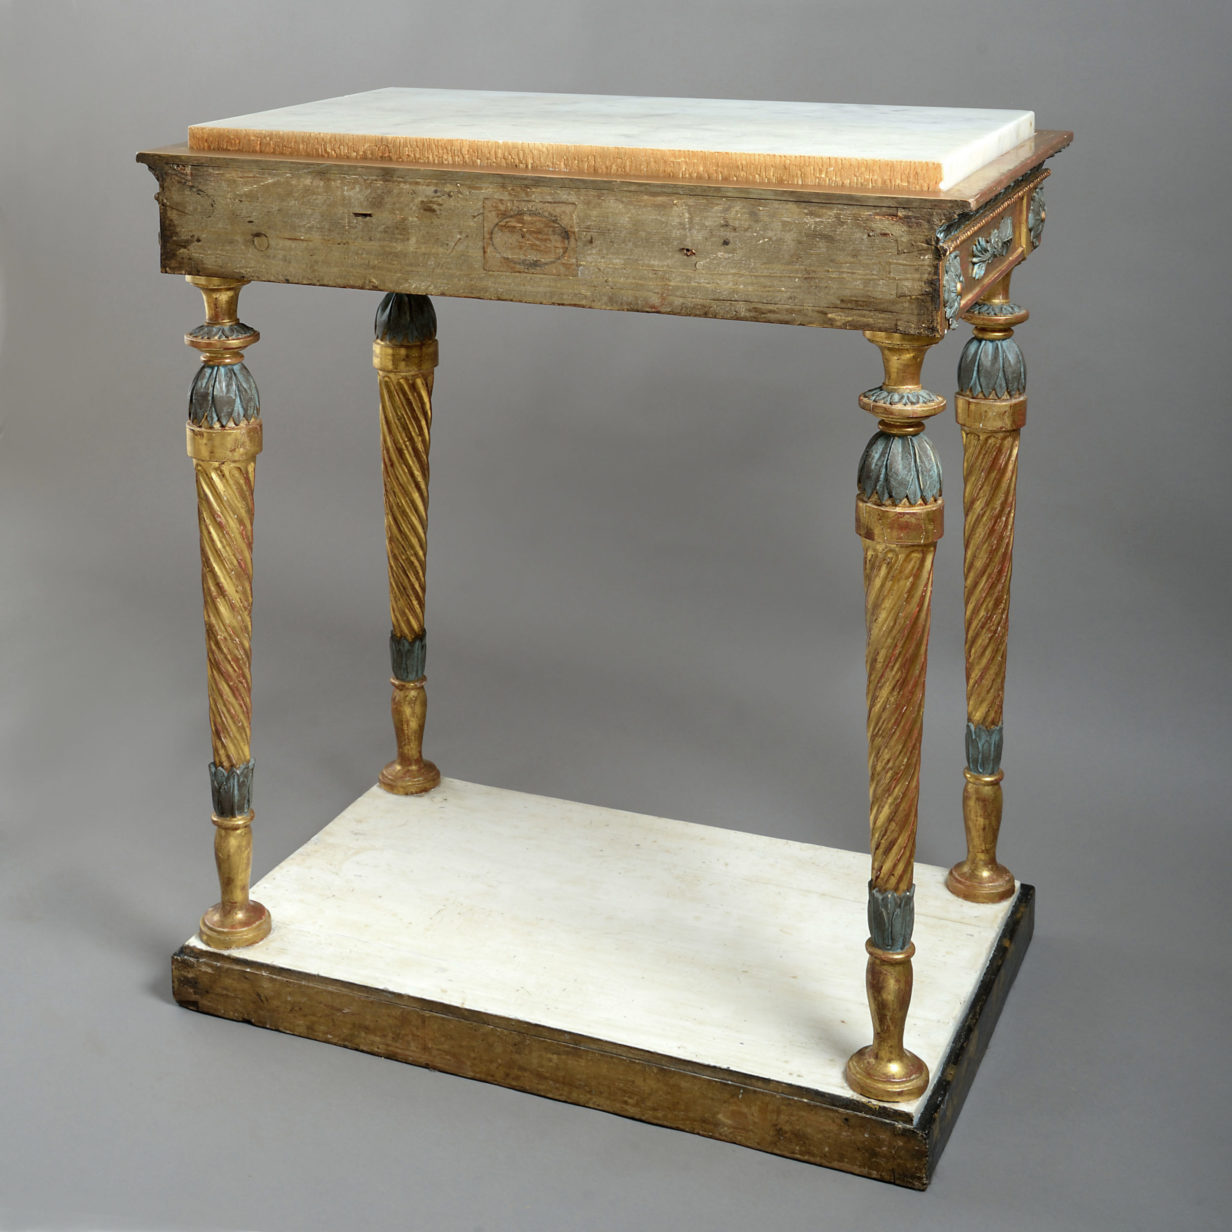 An early 18th century gustavian console table